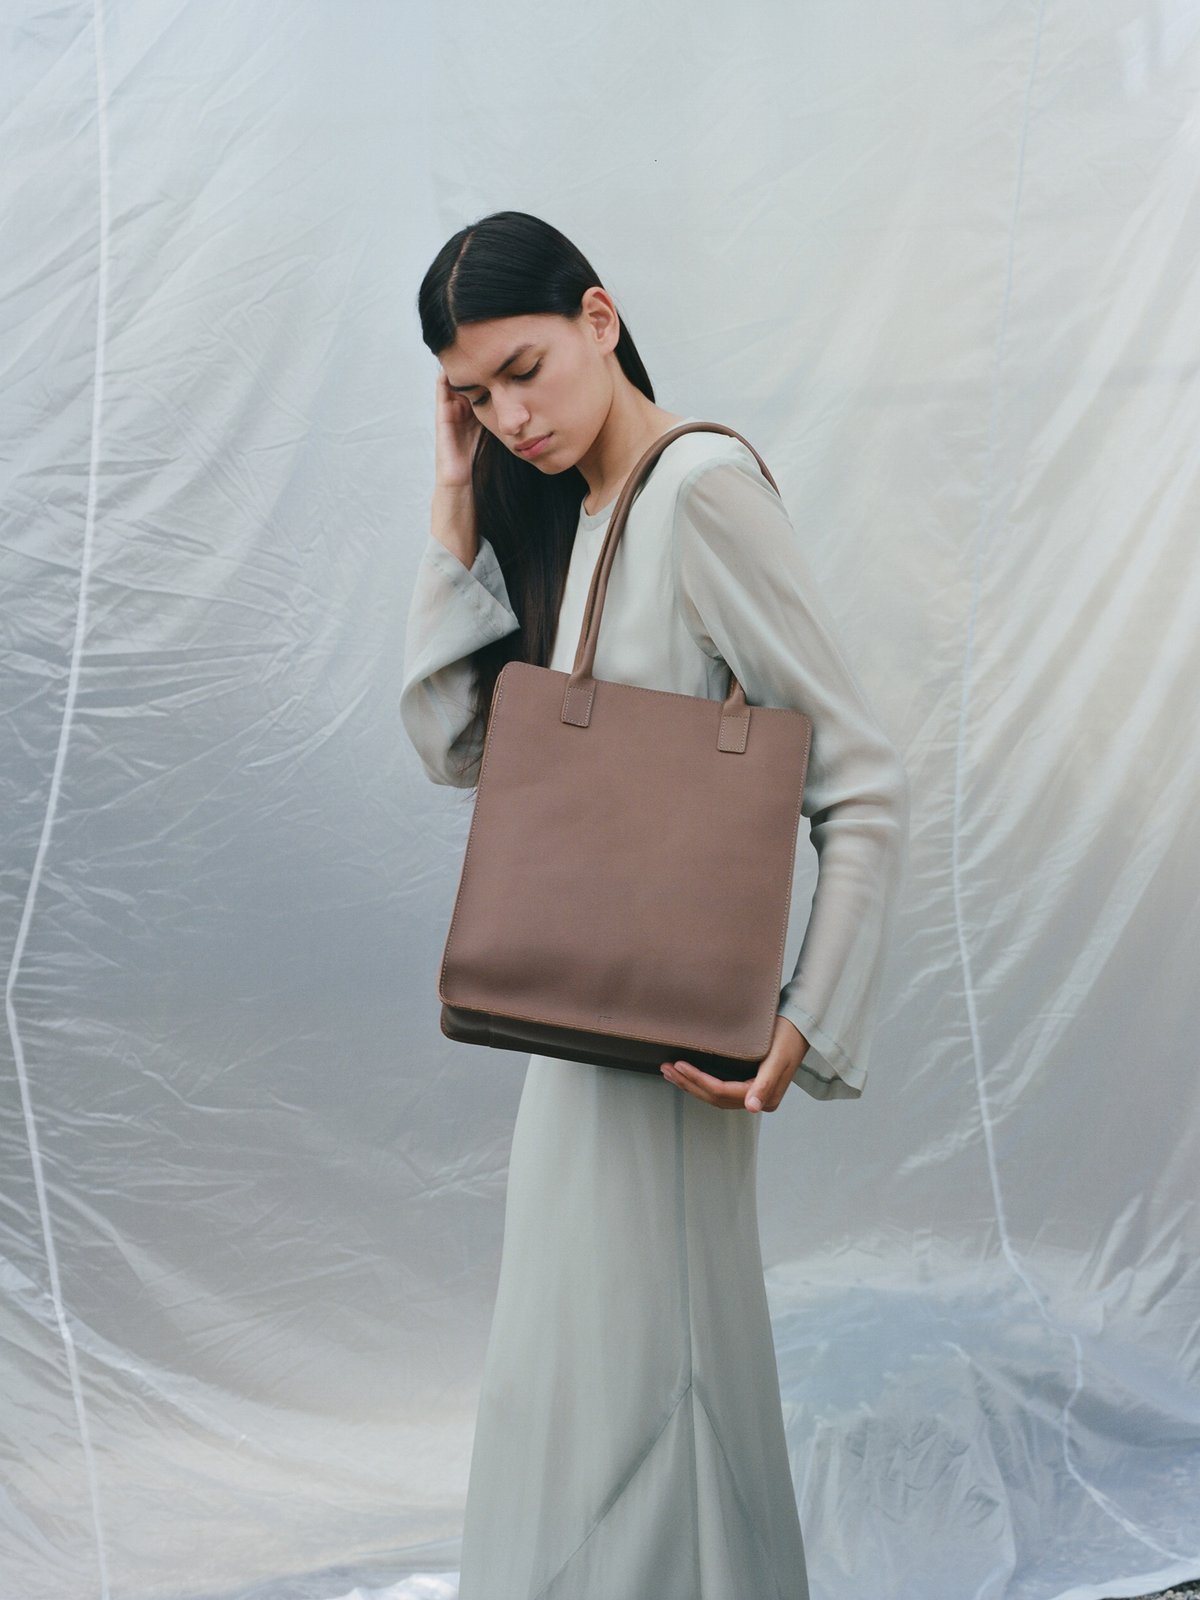 FRANCES in TAN - with item